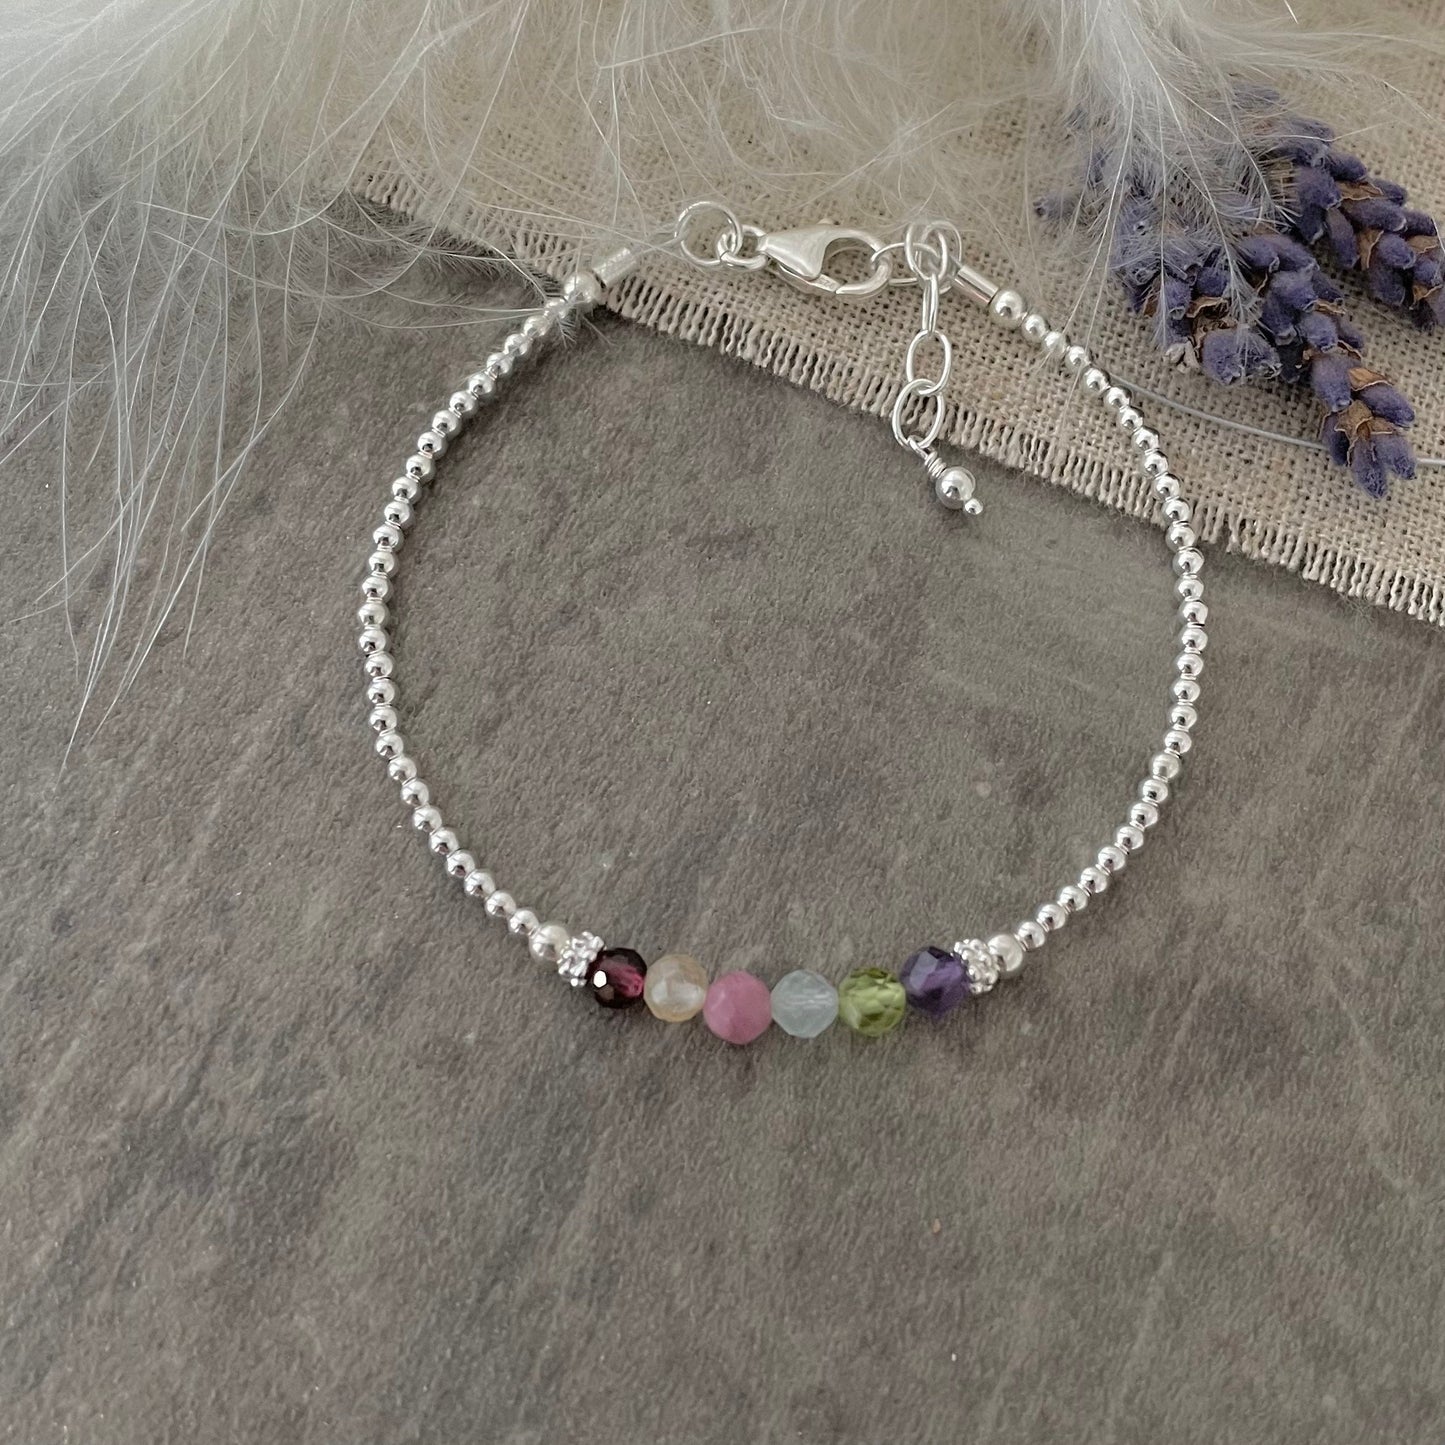 Mothers Birthstone Bracelet, Family Birthstone Jewellery for Mothers Day in Sterling Silver nft